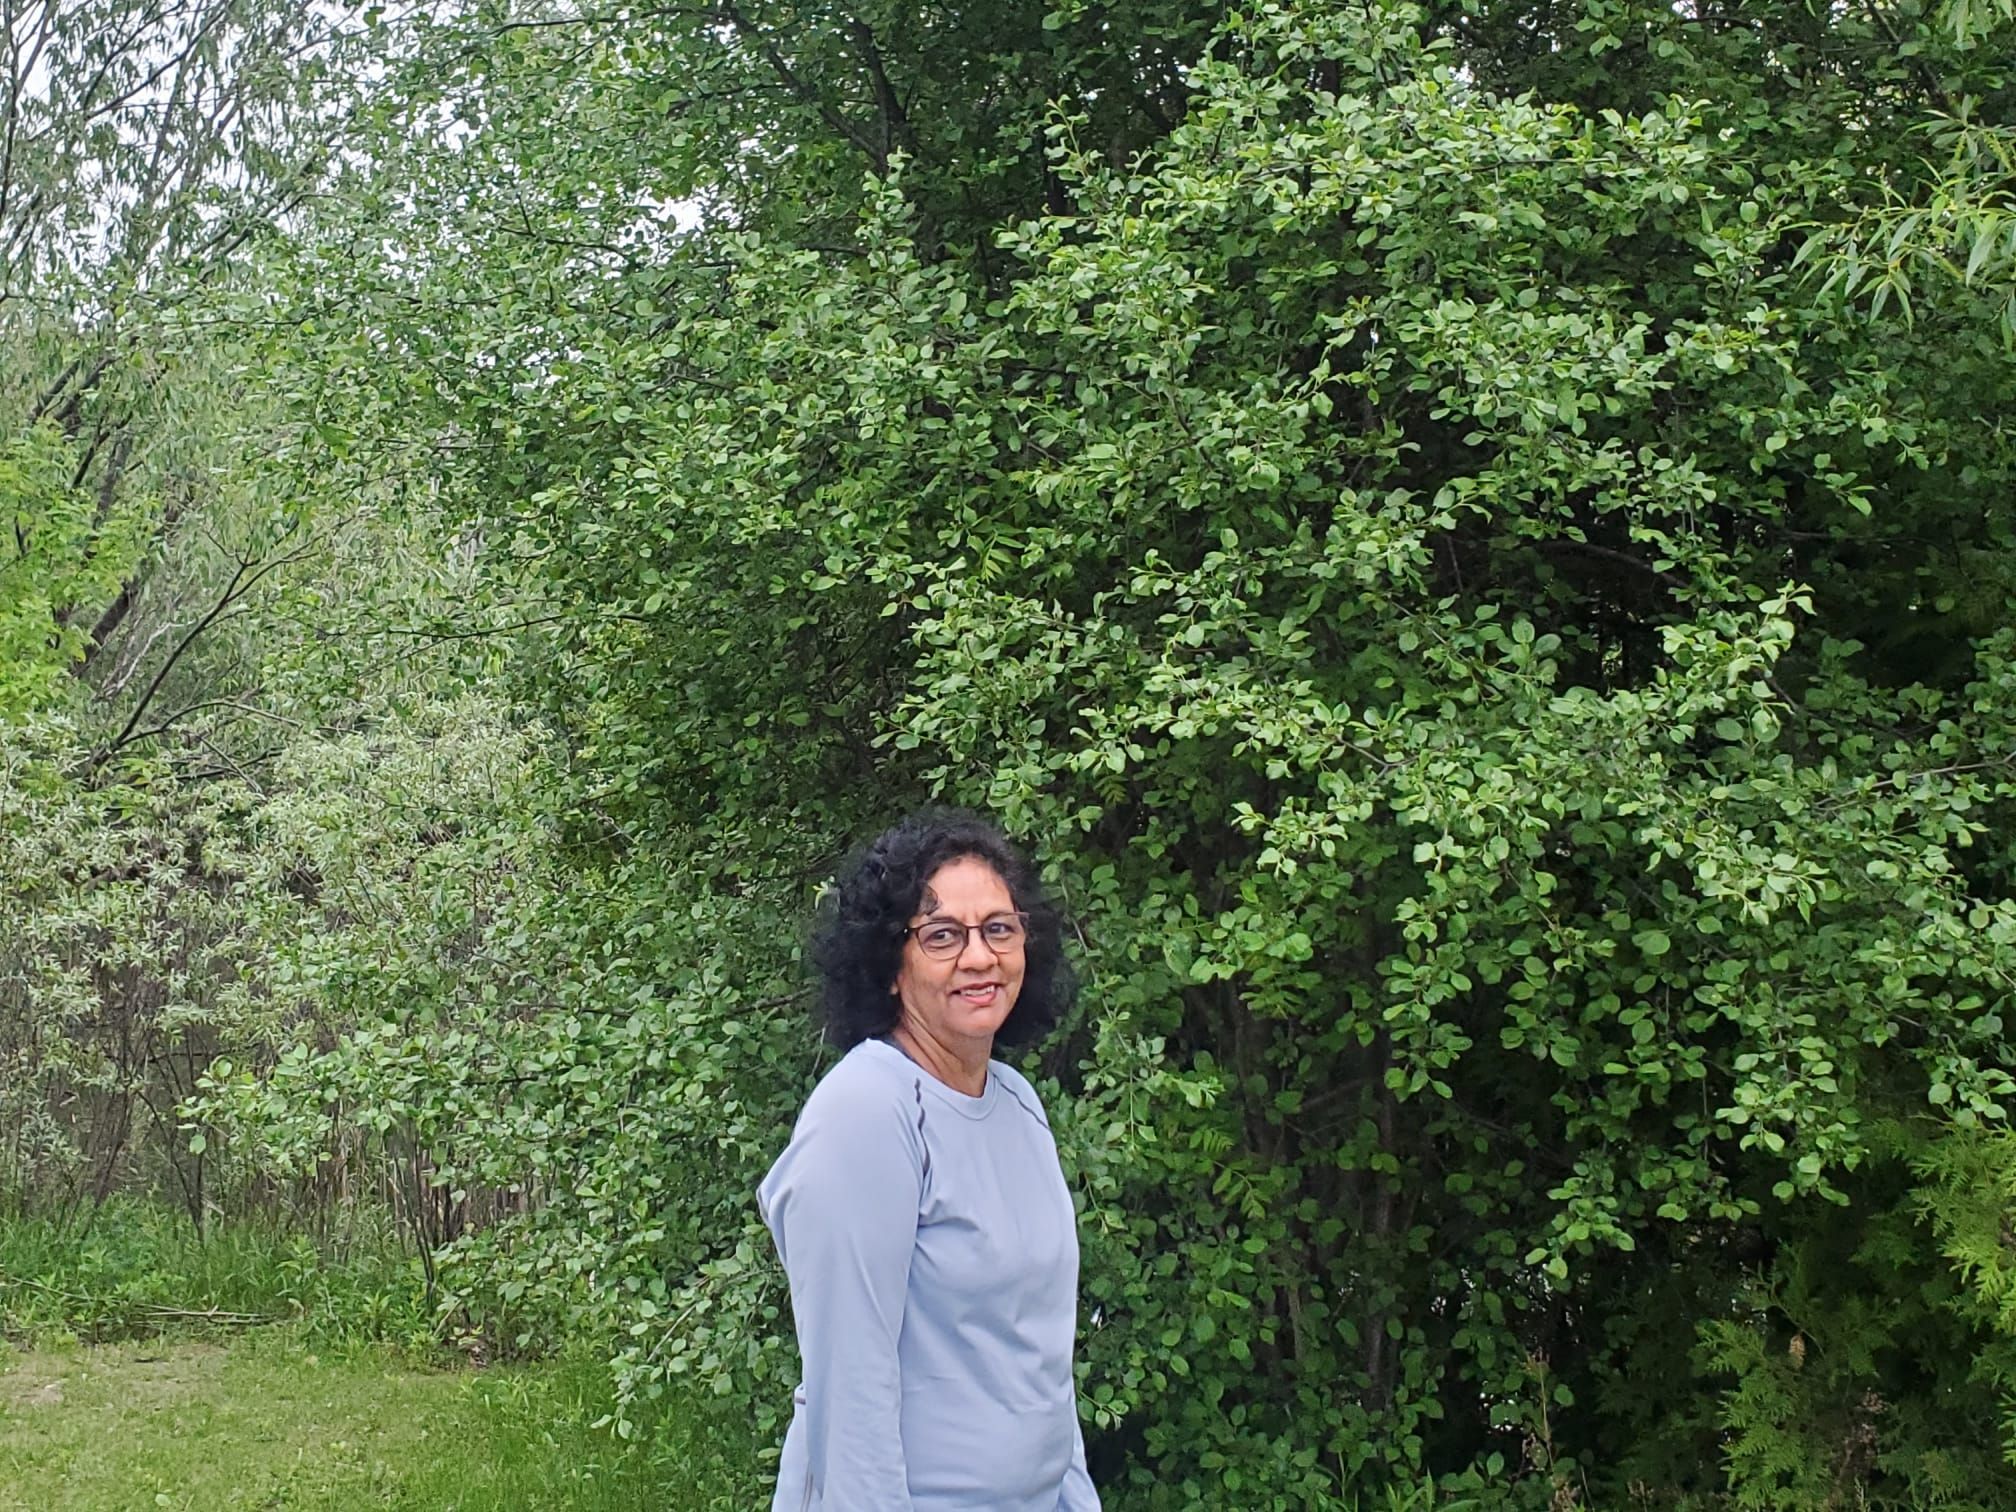 Candid portrait of Basmati Persaud standing outside near trees.